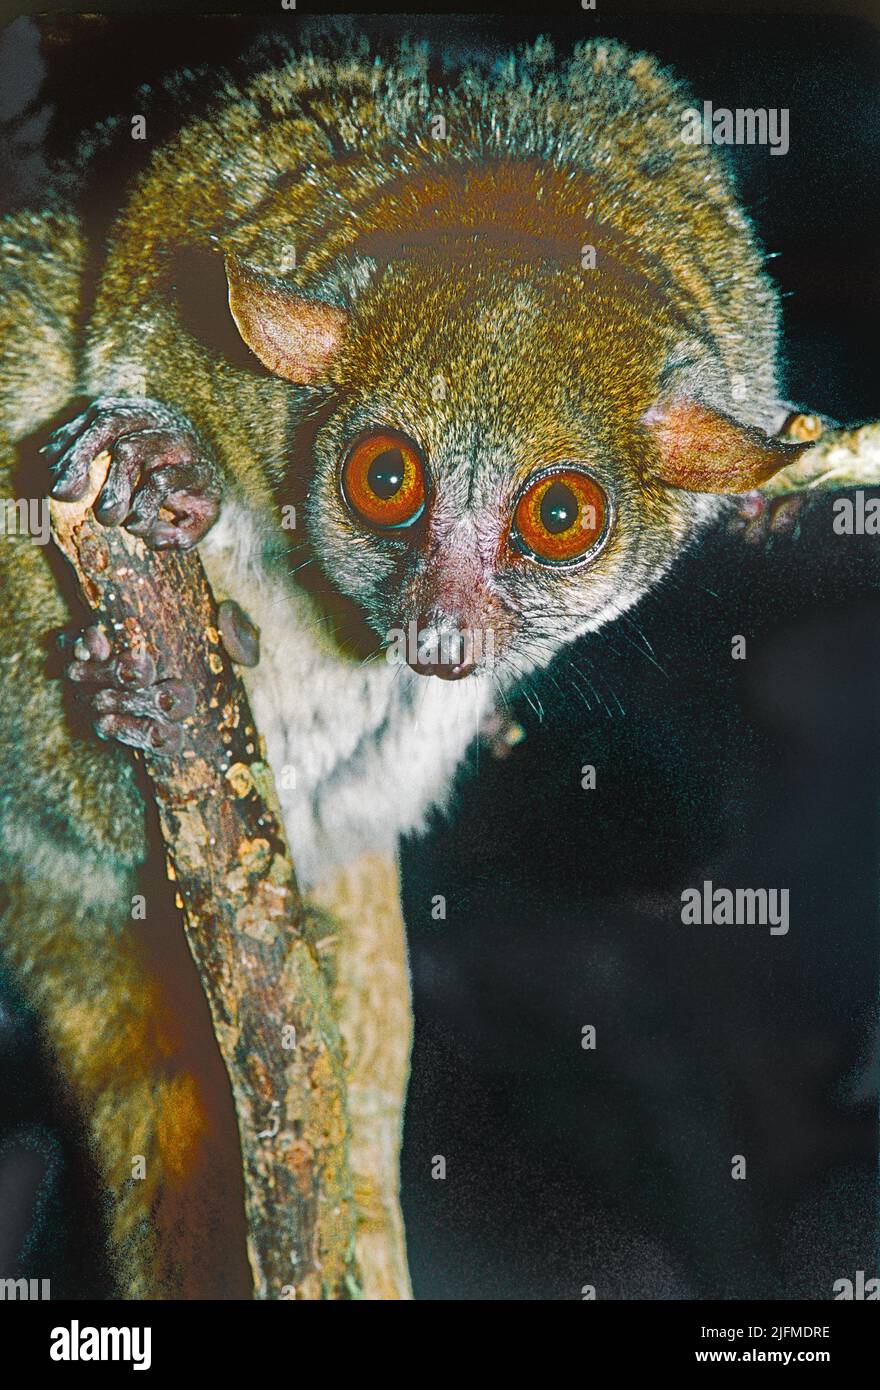 Coquerel's Dwarf Lemur or Giant Mouse Lemur,   (Mirza coquereli). from North West Madagascar. Listed as Endangered. Stock Photo